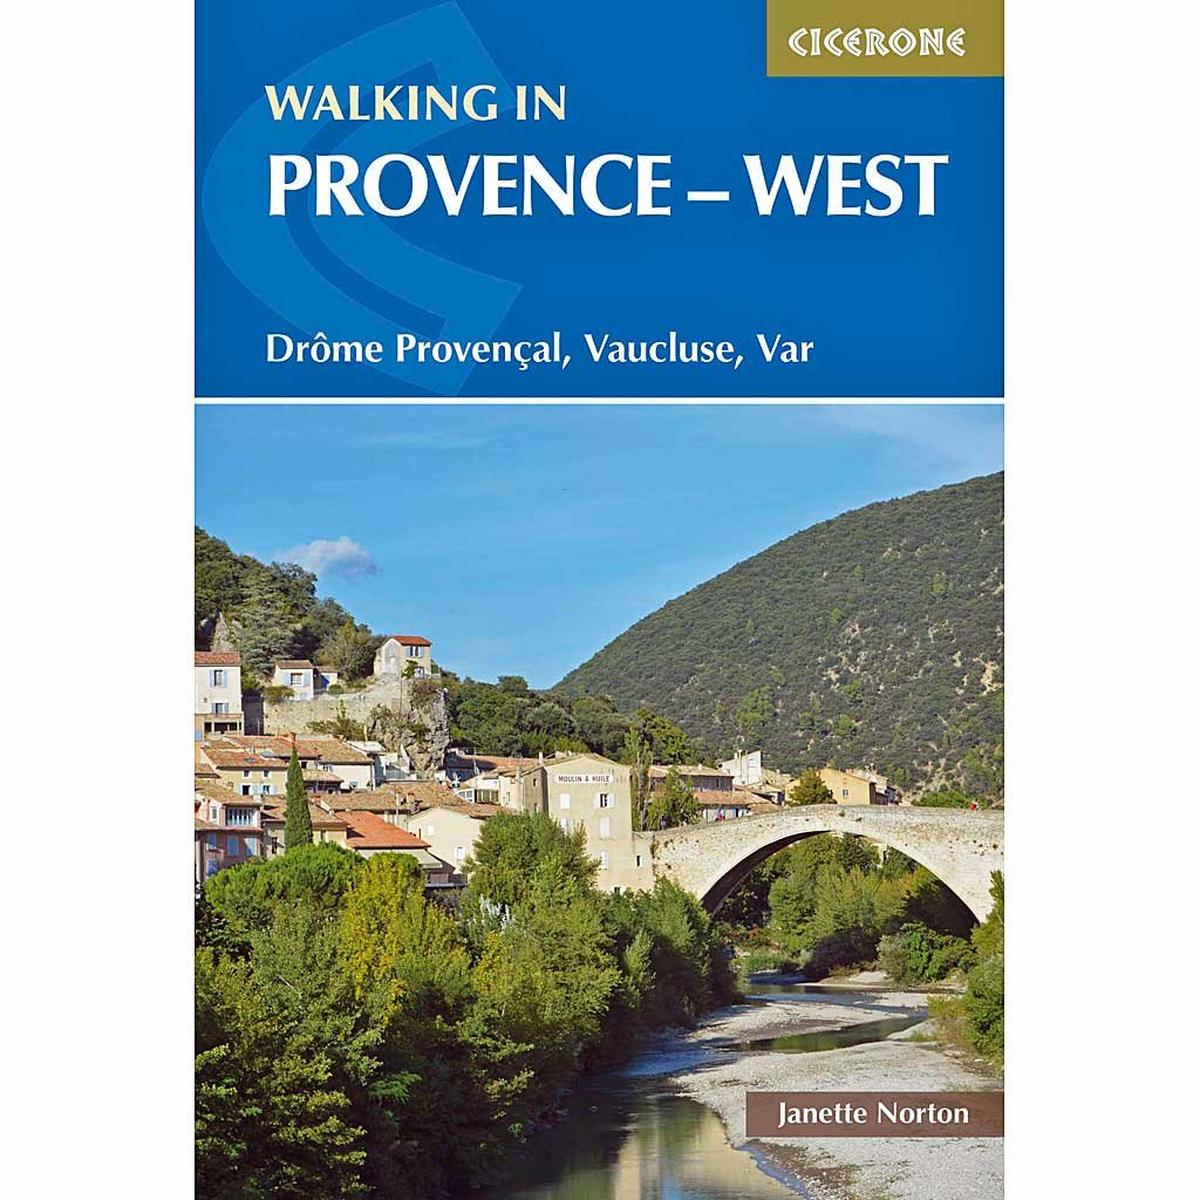 Cicerone Guide Book: Walking in Provence - West